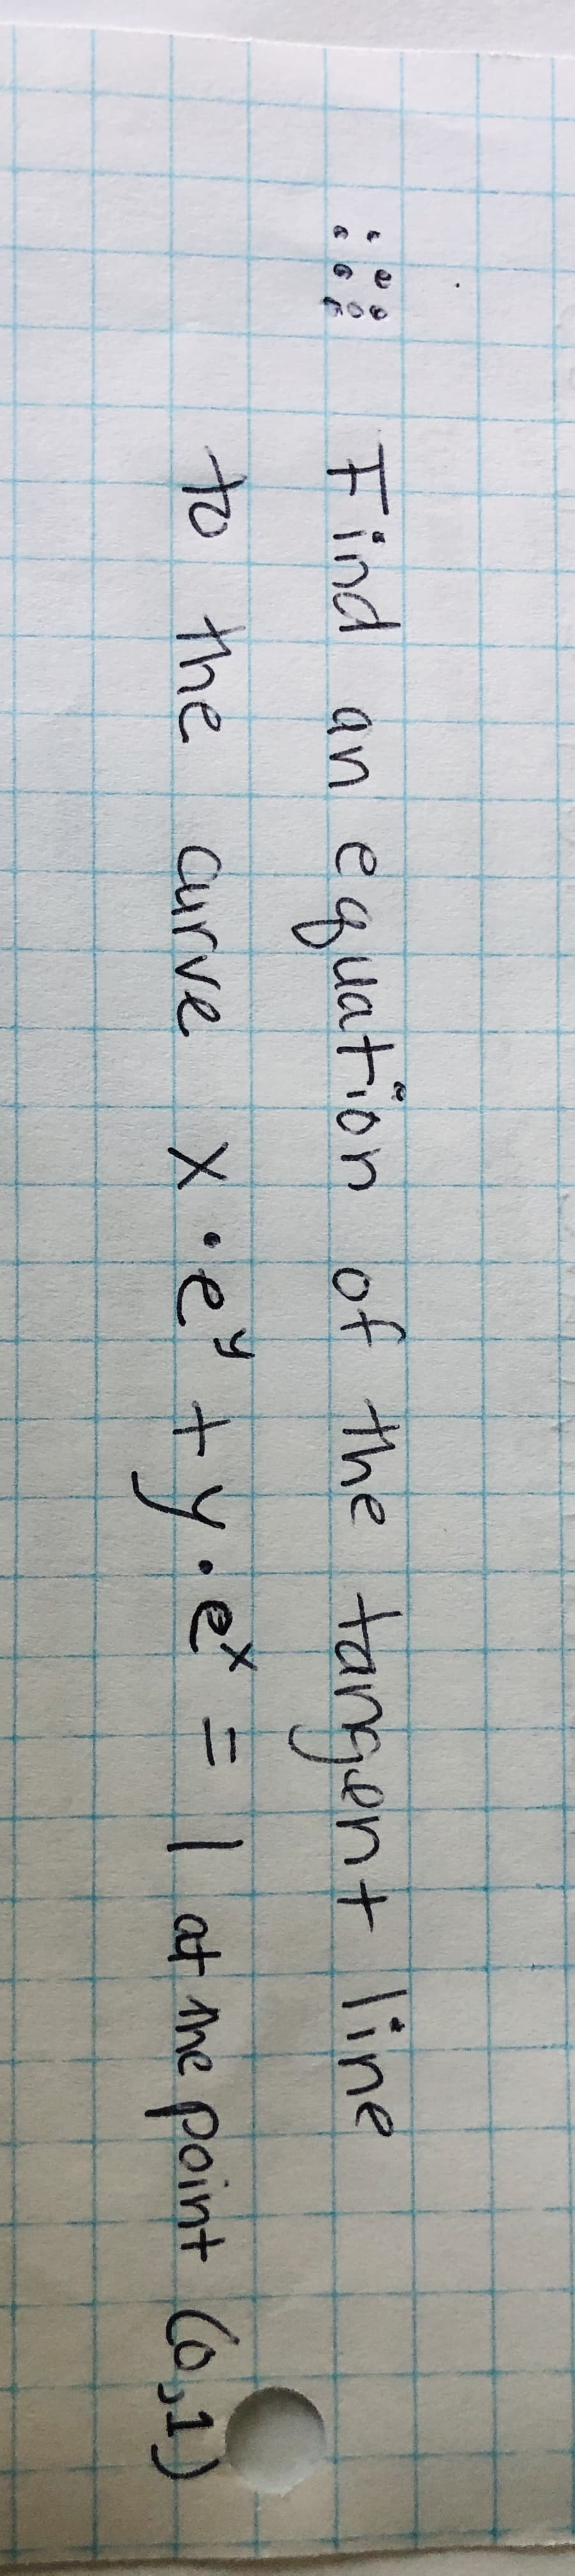 Find an equation of the targent line
to the
Curve X•e° t y.e =I at me point Co,1)
